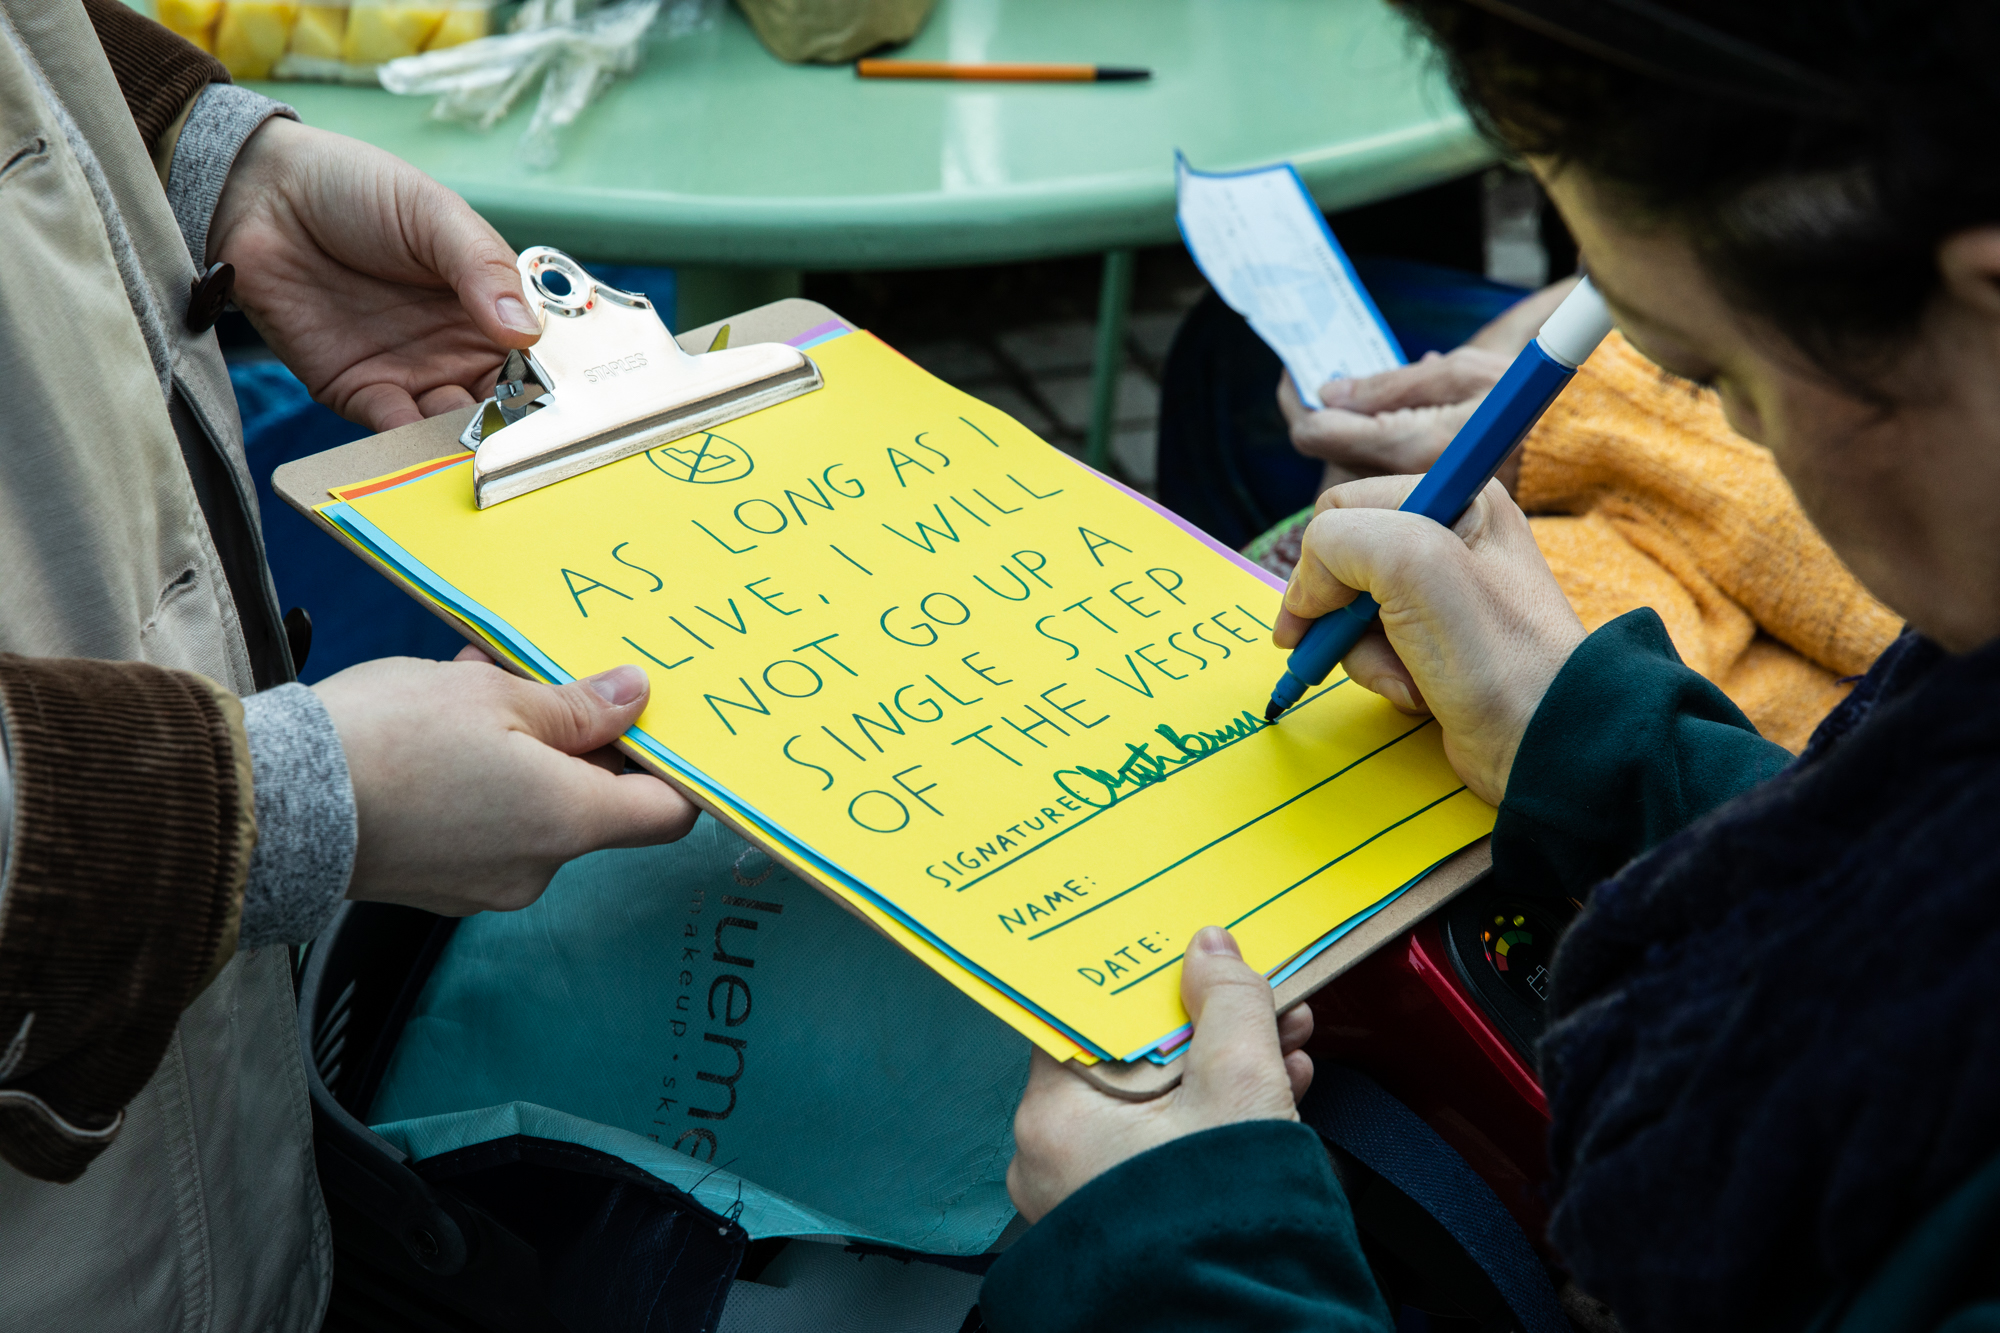 Close up photo of someone's hands holding a clipboard for another person to sign the pledge that states, "As long as I live, I will not go up a single step of the Vessel" in green text written on a piece of bright yellow paper.